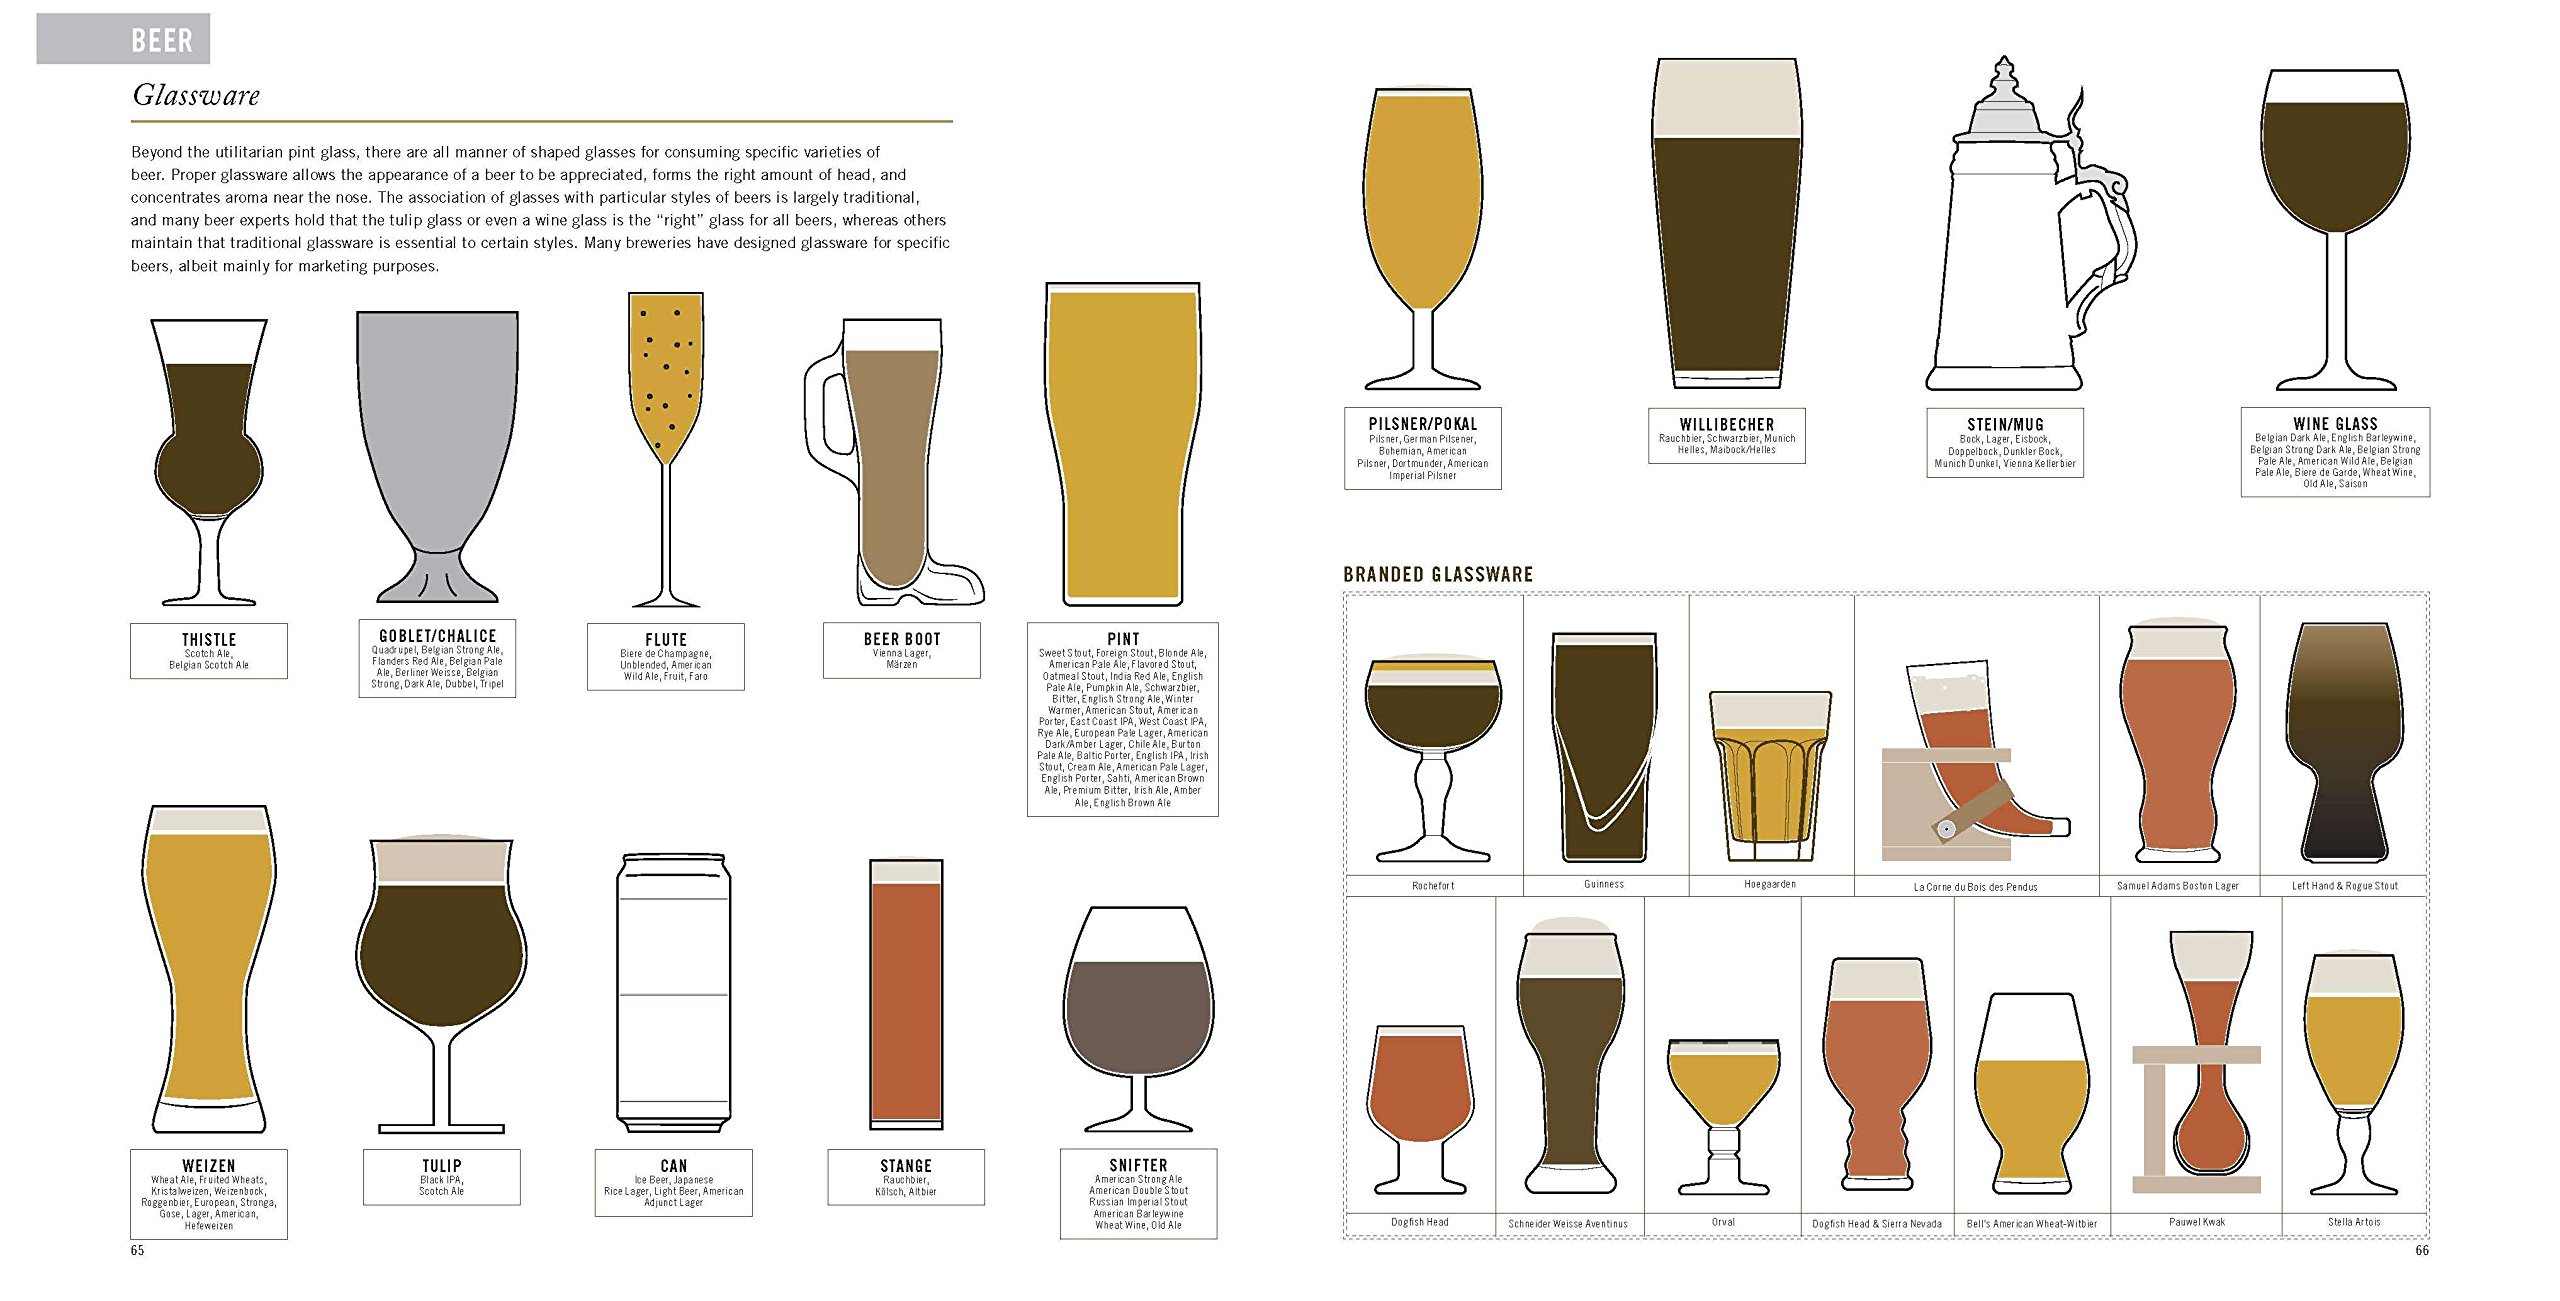 “A visual guide to drink”, di Pop Chart Lab, Penguin Random House 2015